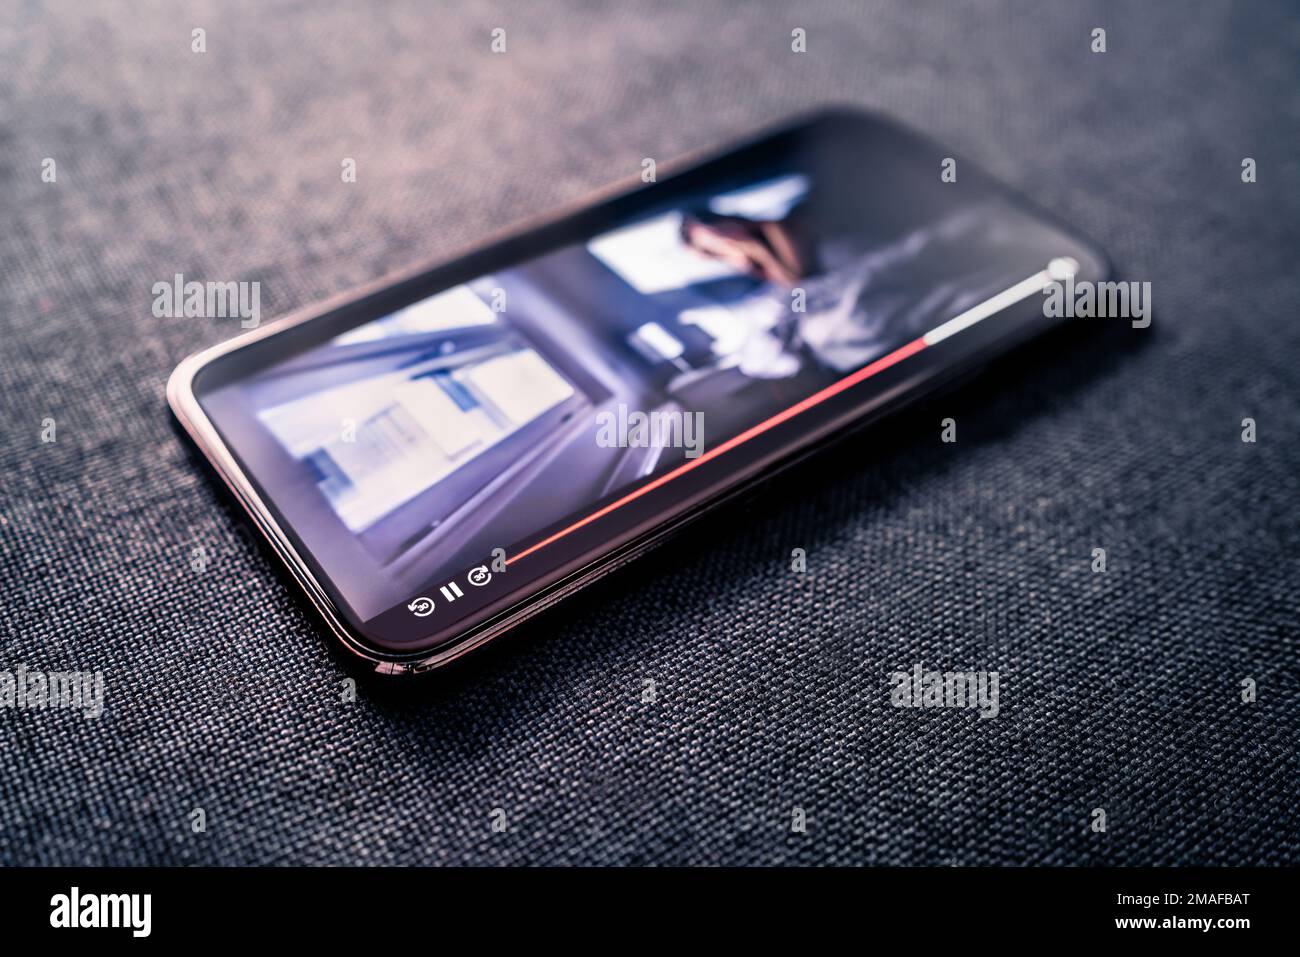 Movie stream or video player in mobile phone. Watching series online with smartphone concept. Film on demand service. Mockup VOD in screen. Stock Photo